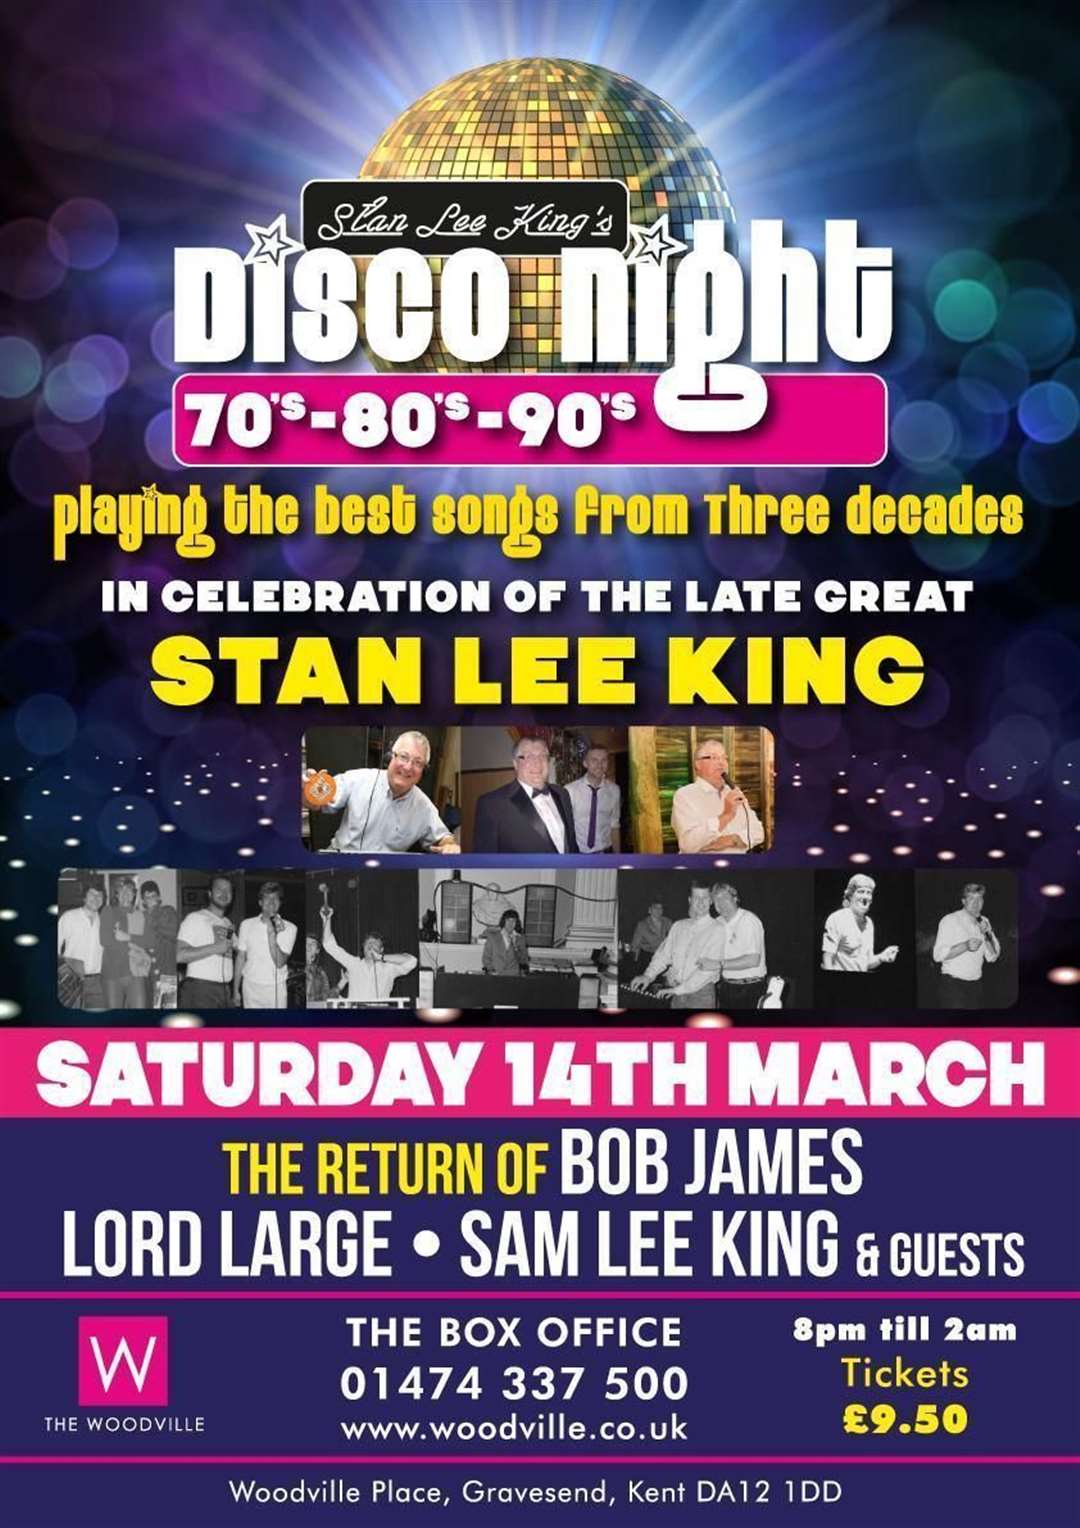 The Stan Lee King Disco Night is being held at the Woodville next month.